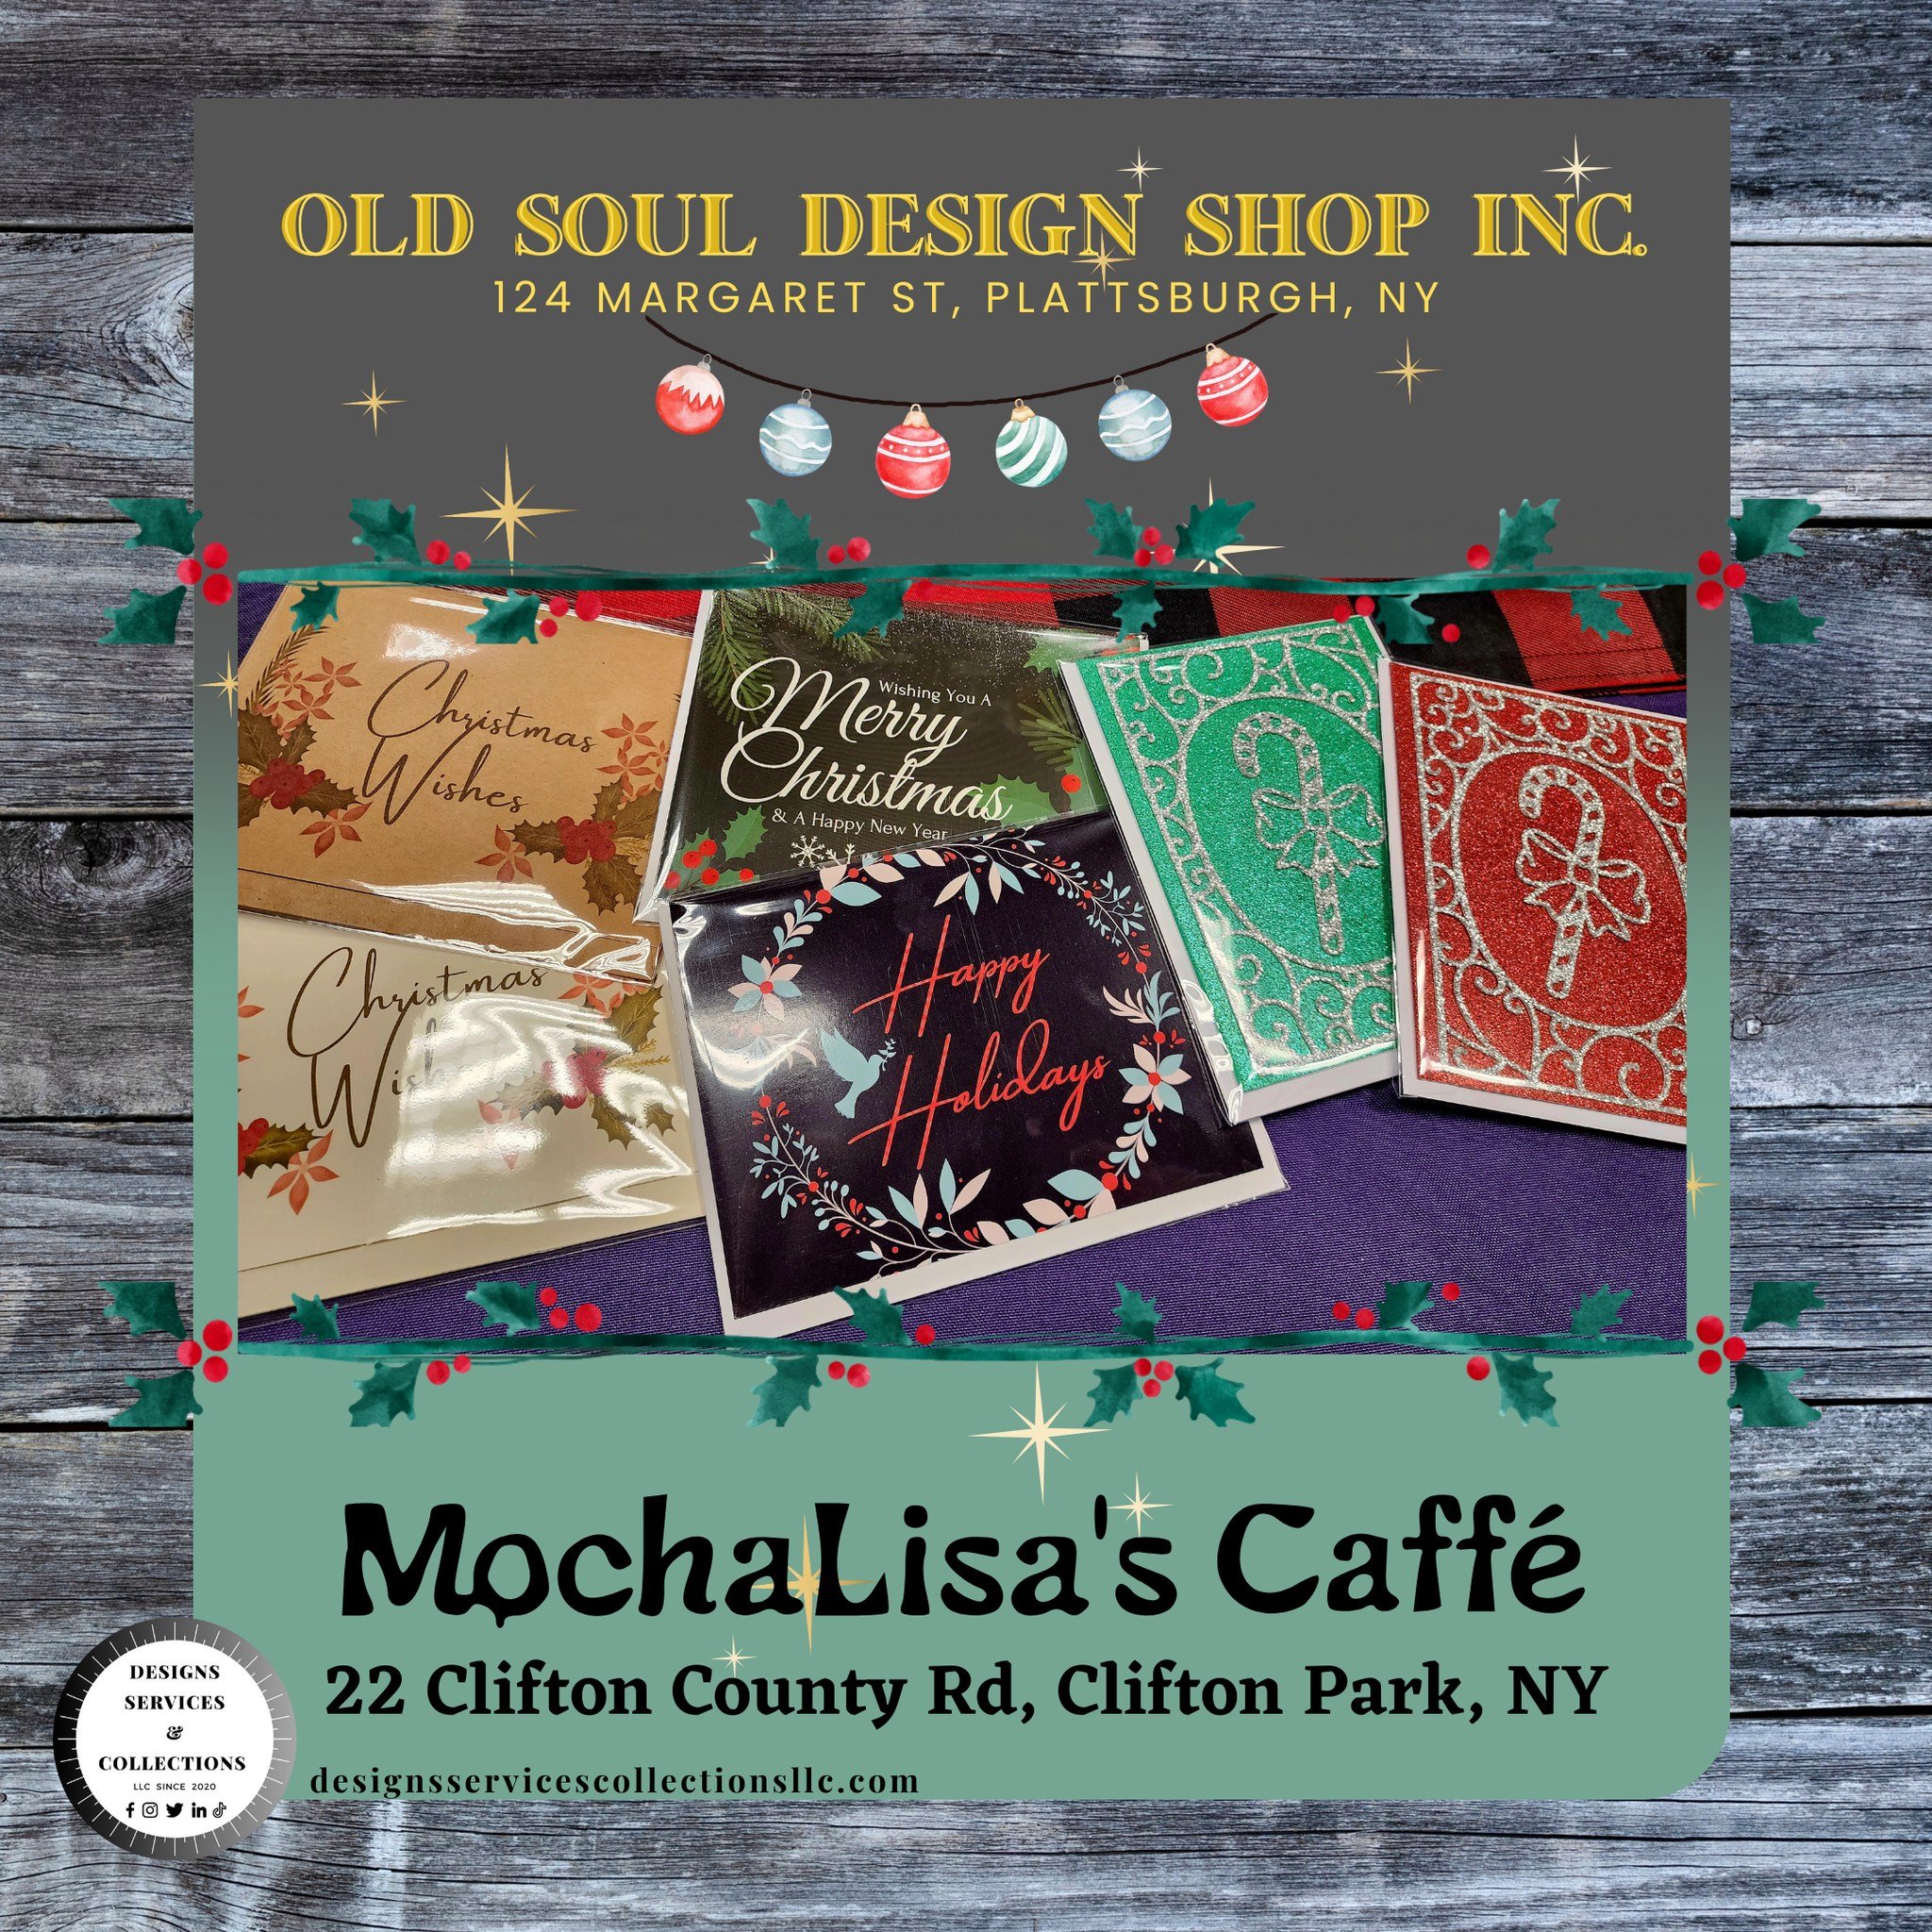 Tie in your gift with a card! Available at Old Soul Design Shop Inc and @mochalisascaffe